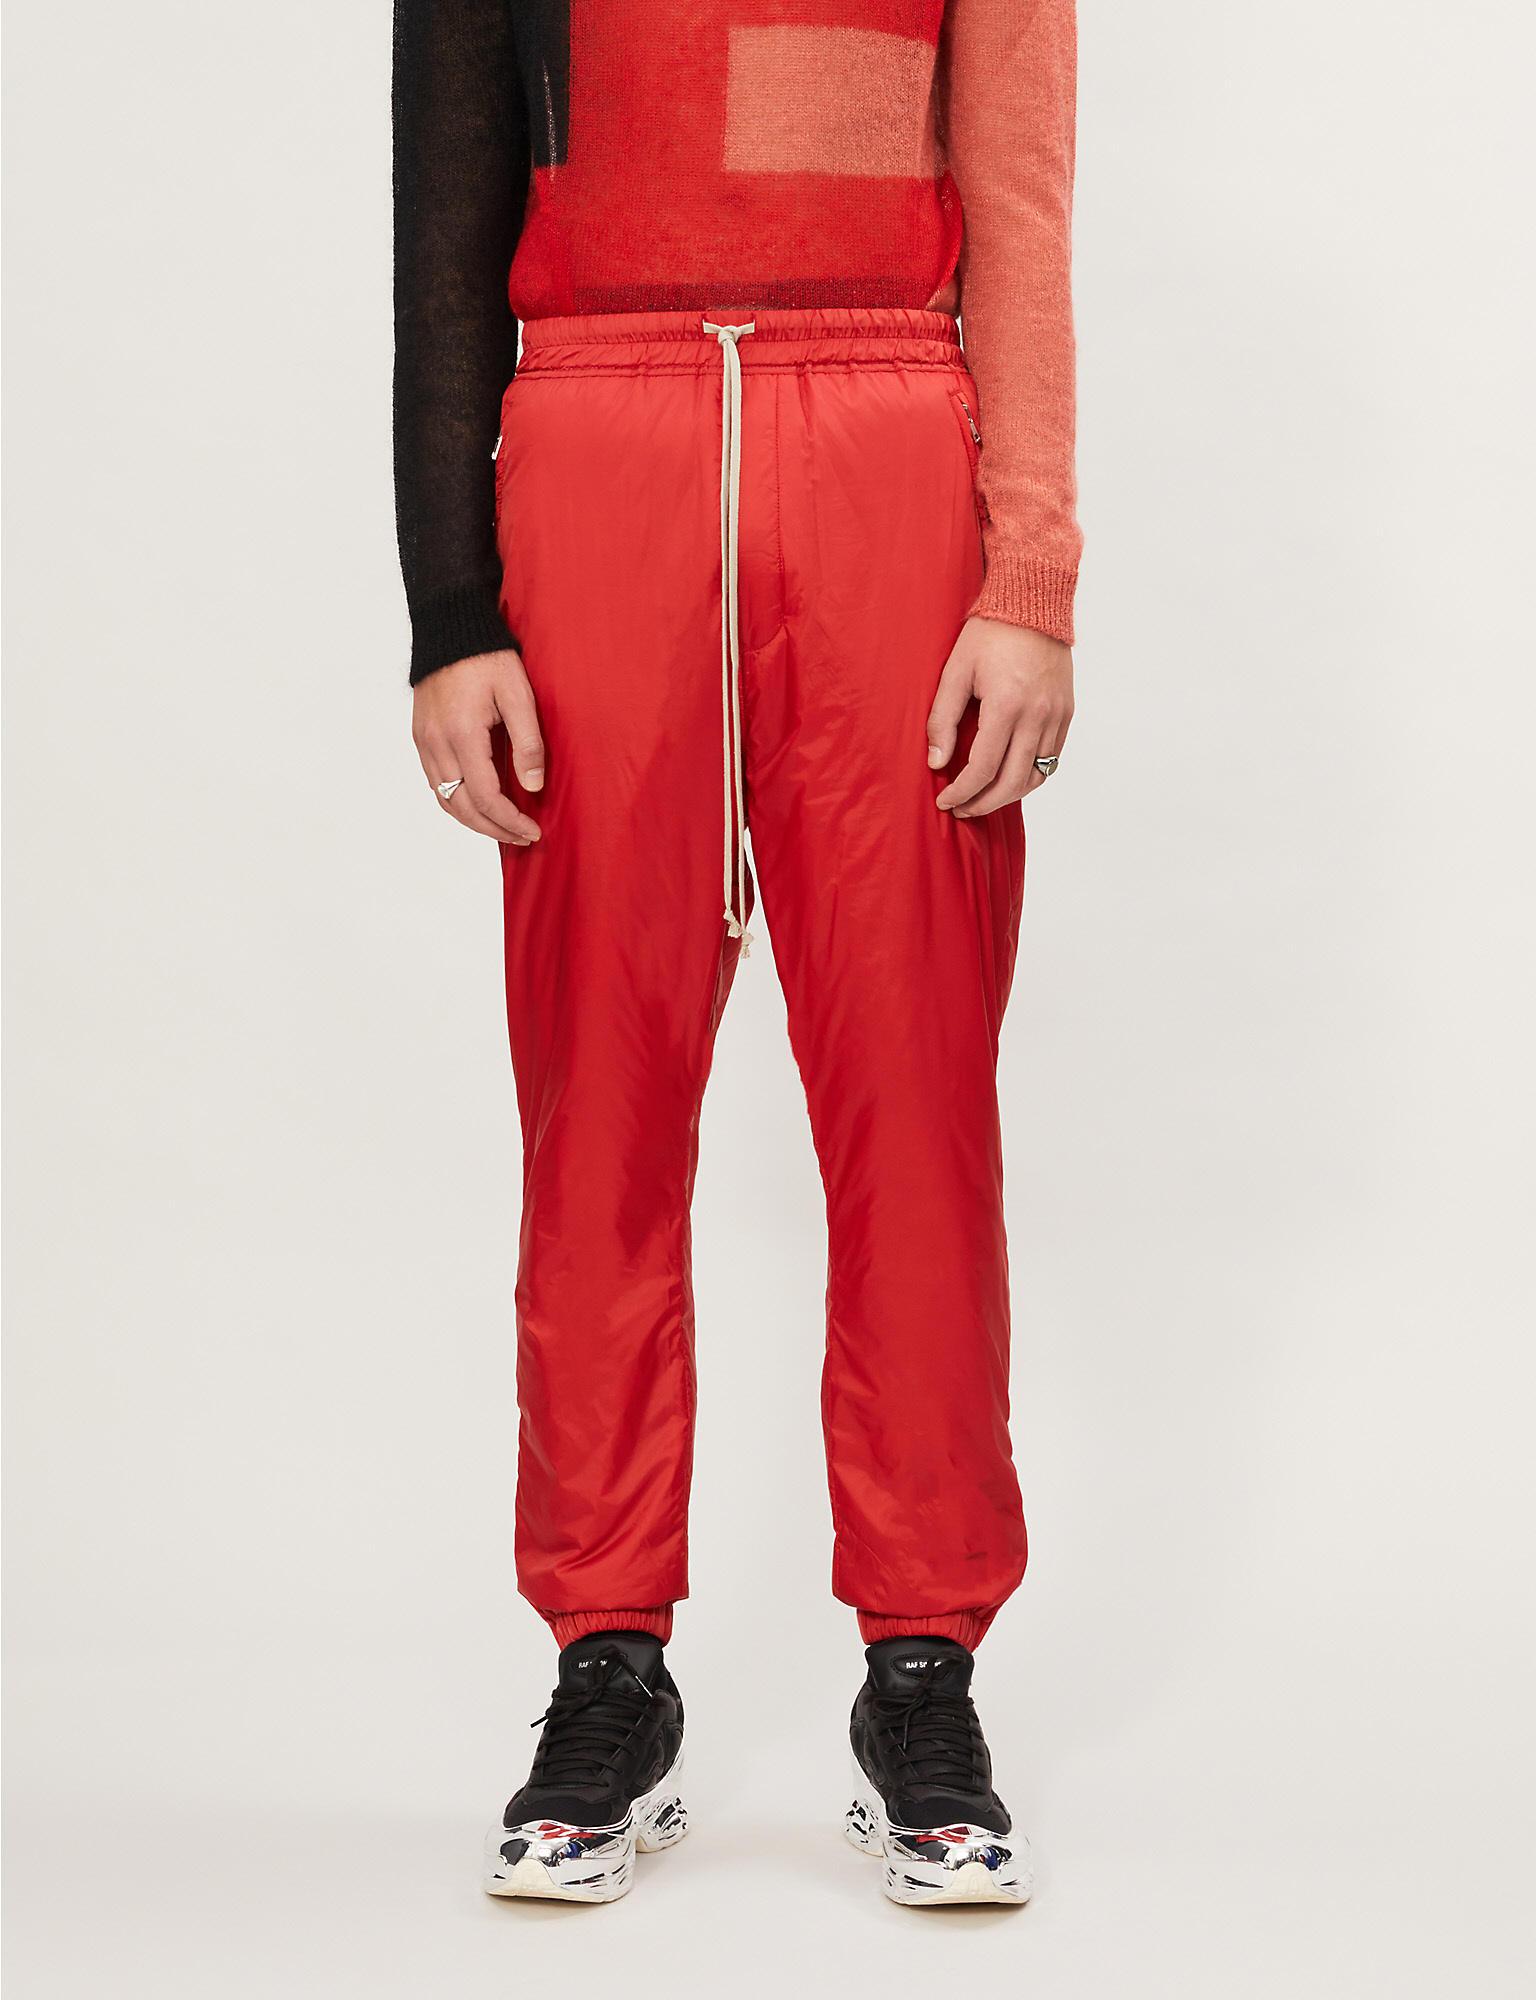 Rick Owens Padded Woven jogging Bottoms in Red for Men - Lyst